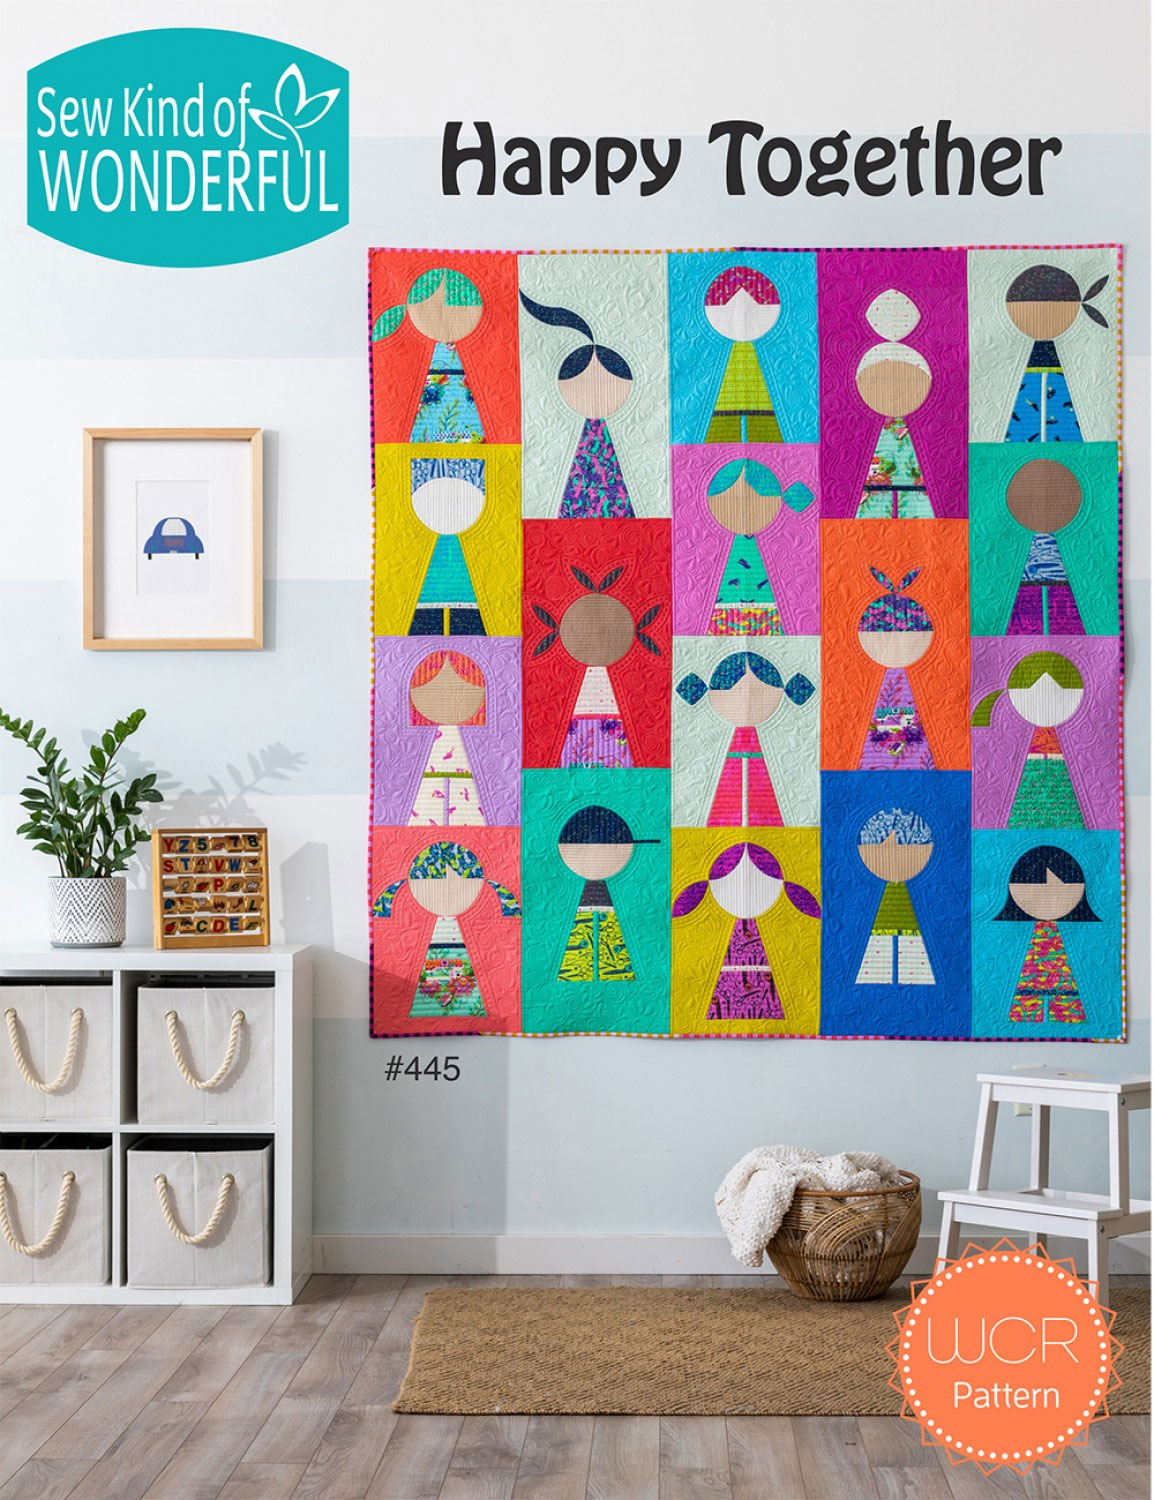 Happy-Together-quilt-sewing-pattern-sew-kind-of-wonderful-front